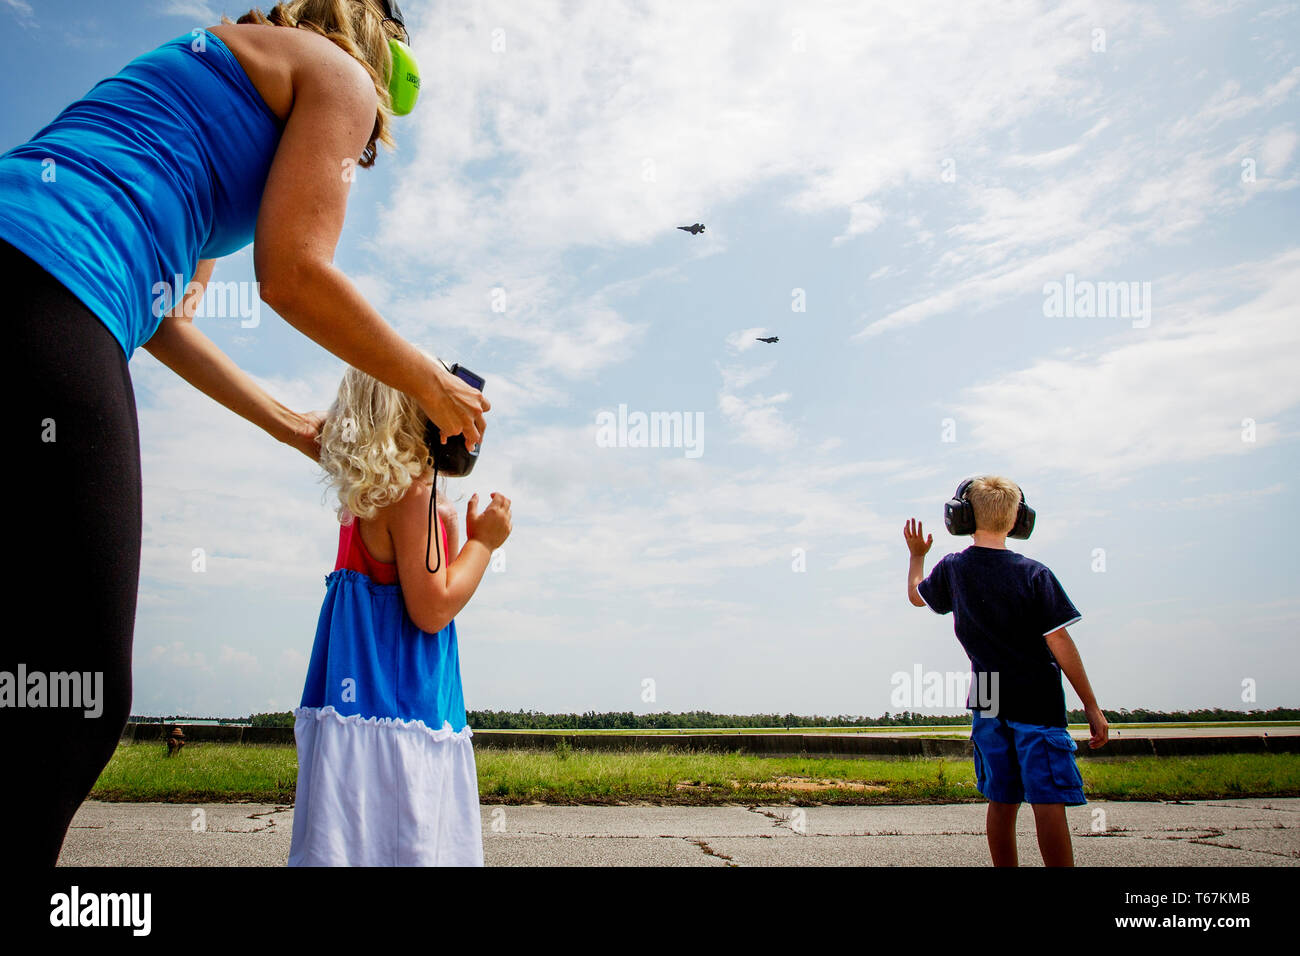 As US pilot Brad Turner does a fly-by on his first mission in the new F-35A Fighter Jet, his wife Whitney, daughter Addison (4) and their son Chase (10) cheer on from the tarmac at the Eglin Air Force Base. Stock Photo